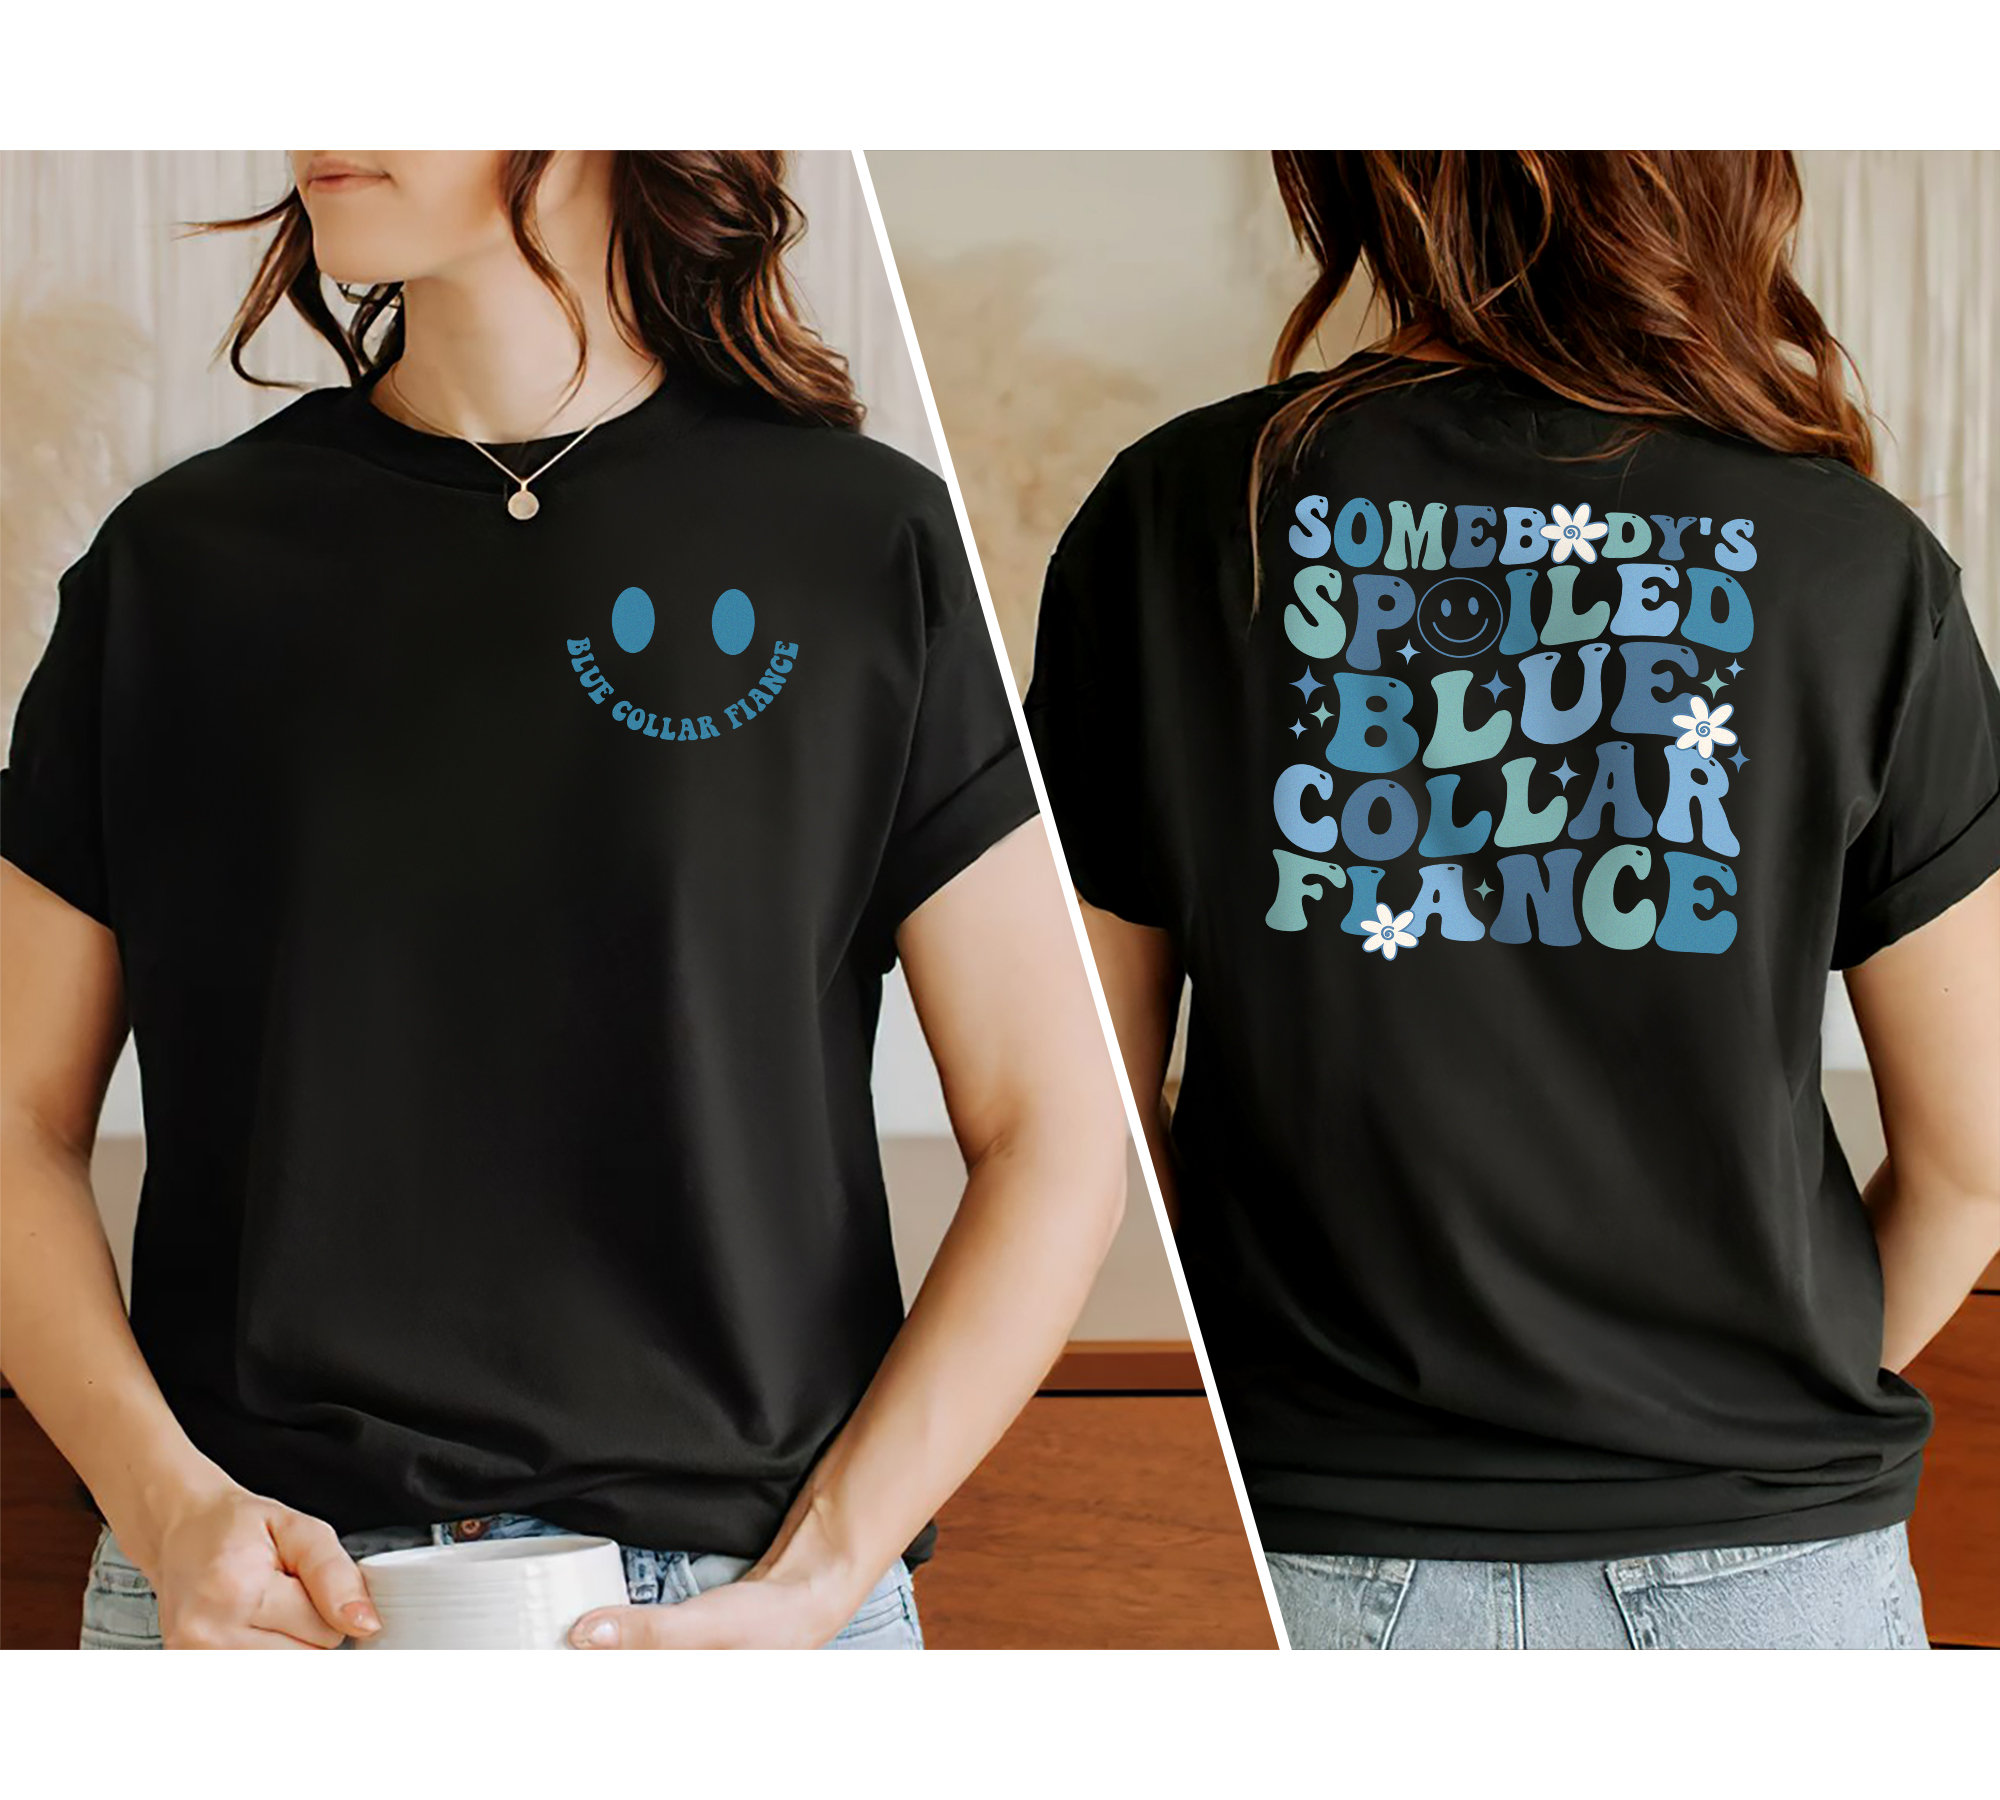 Somebody’s Spoiled Blue Collar Fiancé Shirt, Gift for Bride-to-Be, Blue Collar Tee, Wives T- Shirt